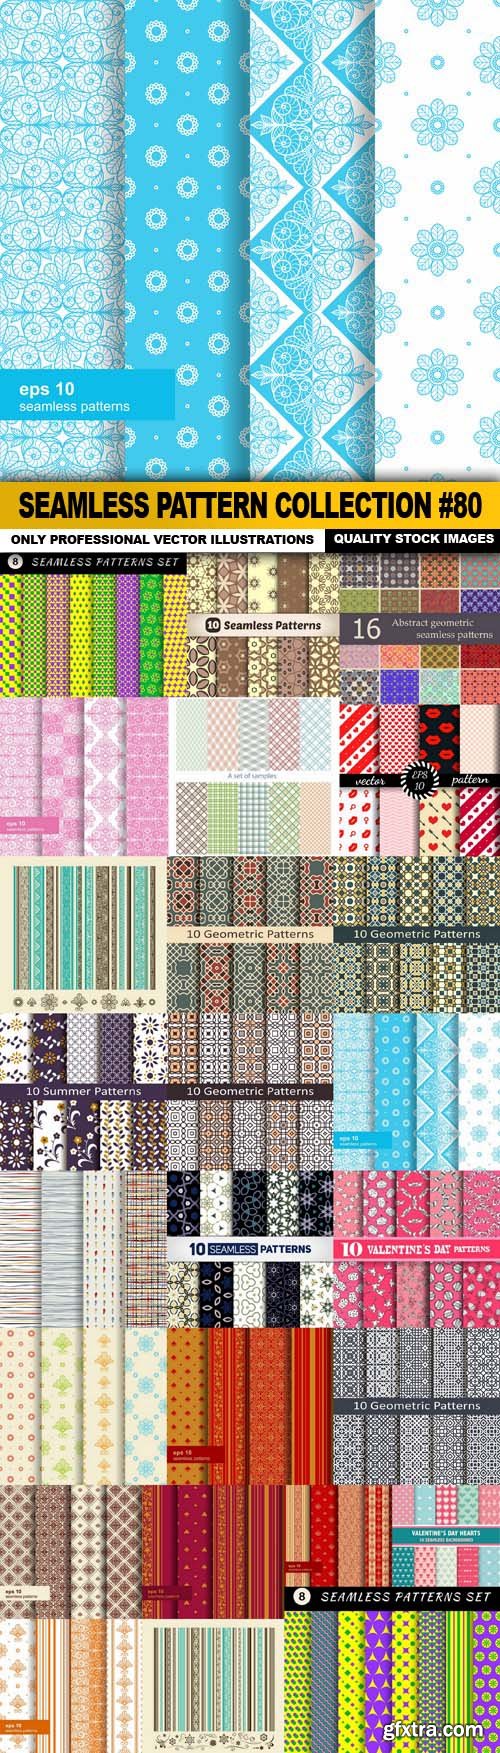 Seamless Pattern Collection #80 - 25 Vector